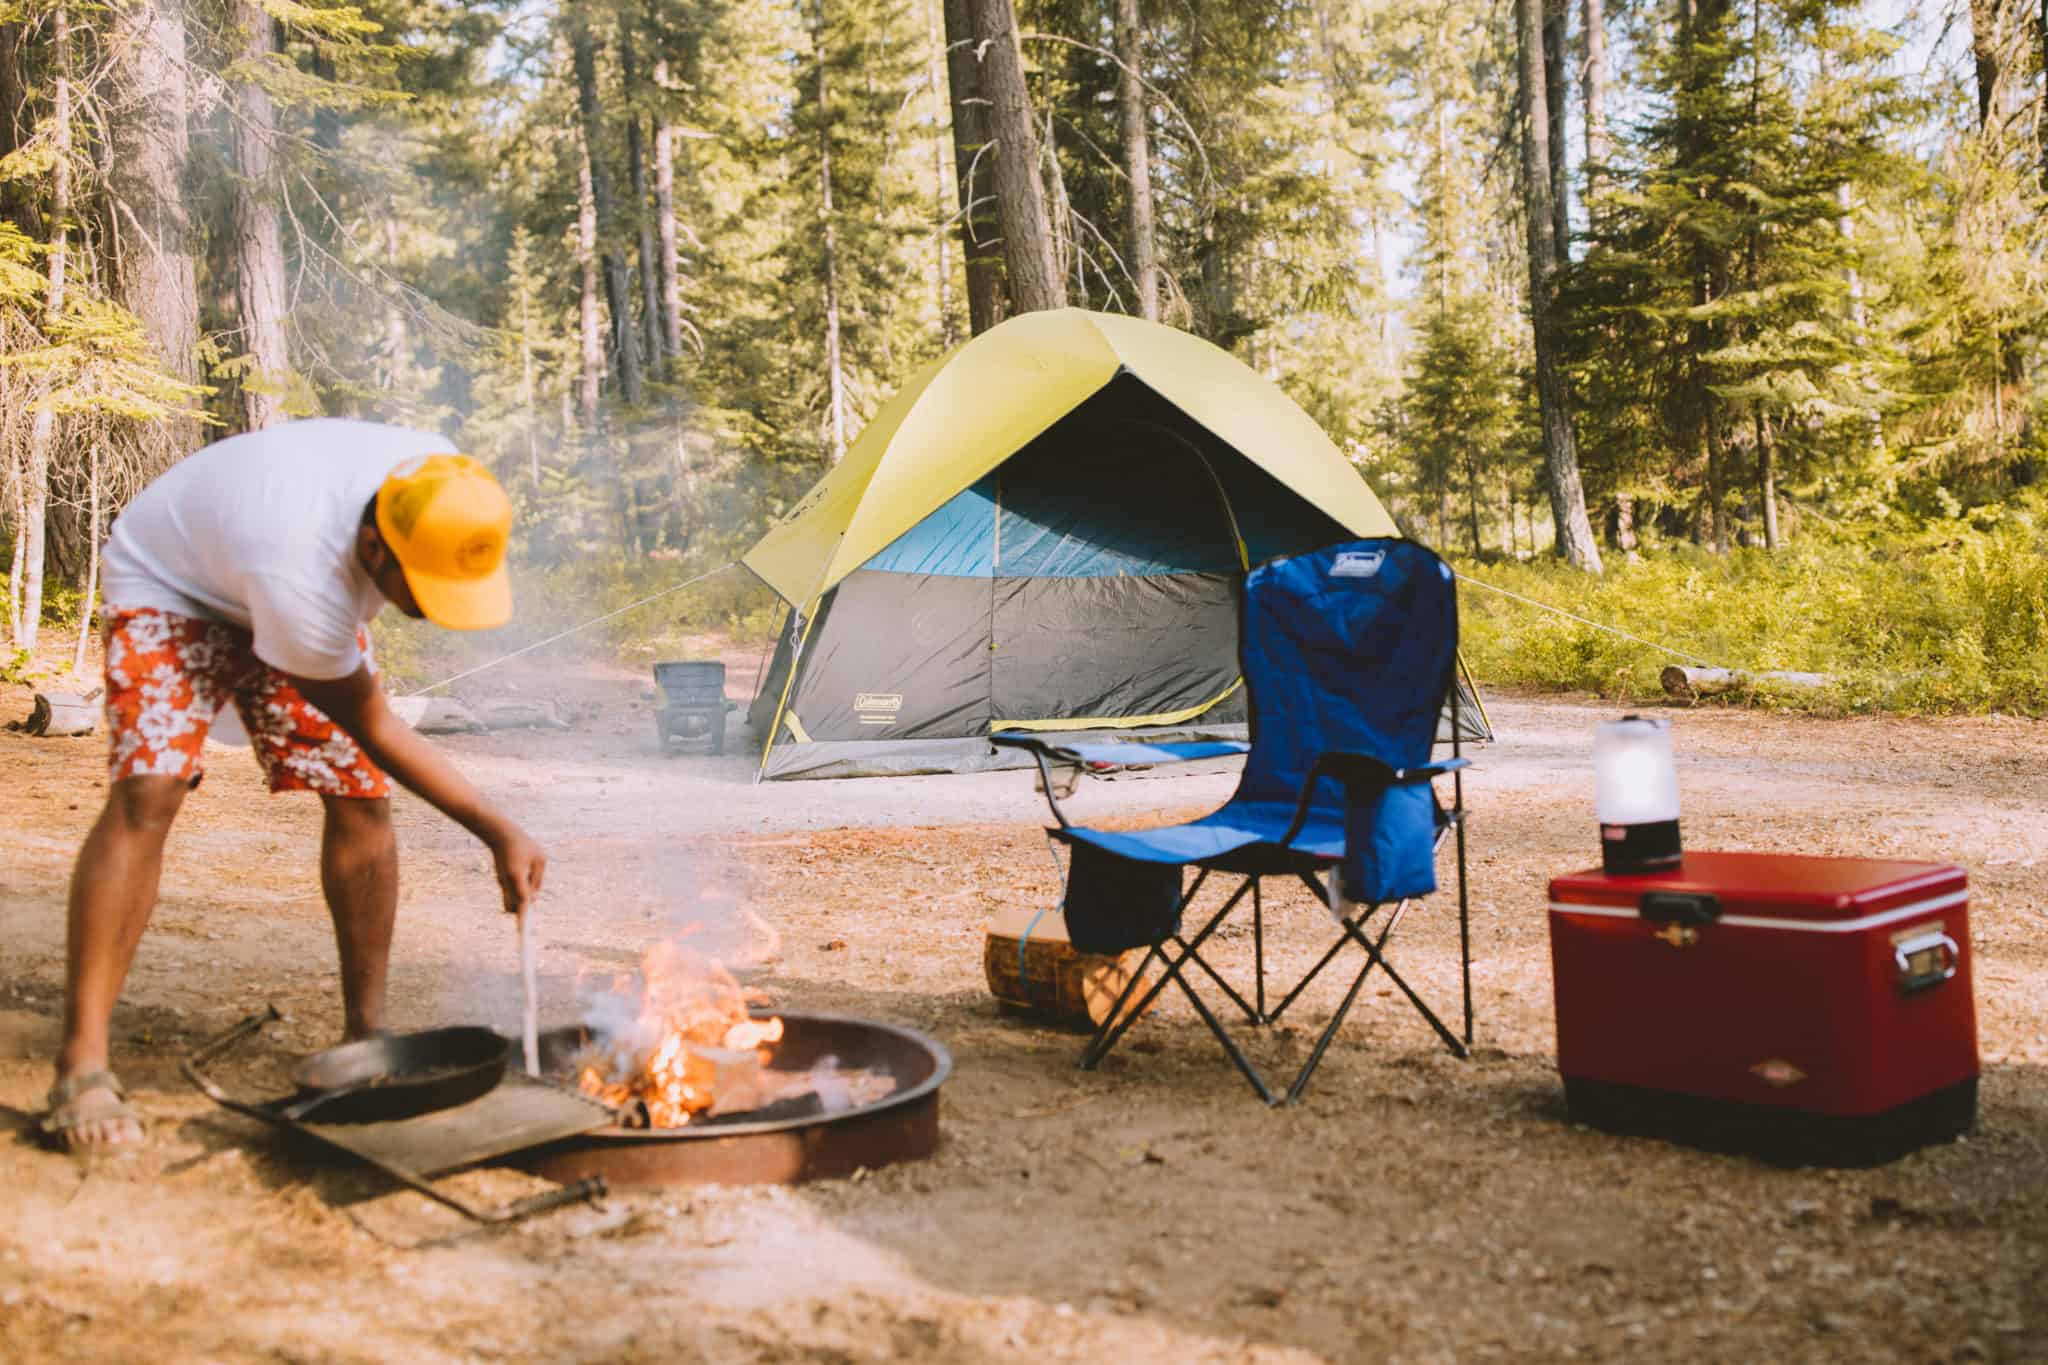 The Ultimate Camping Packing List (+ Free Camping Checklist!)